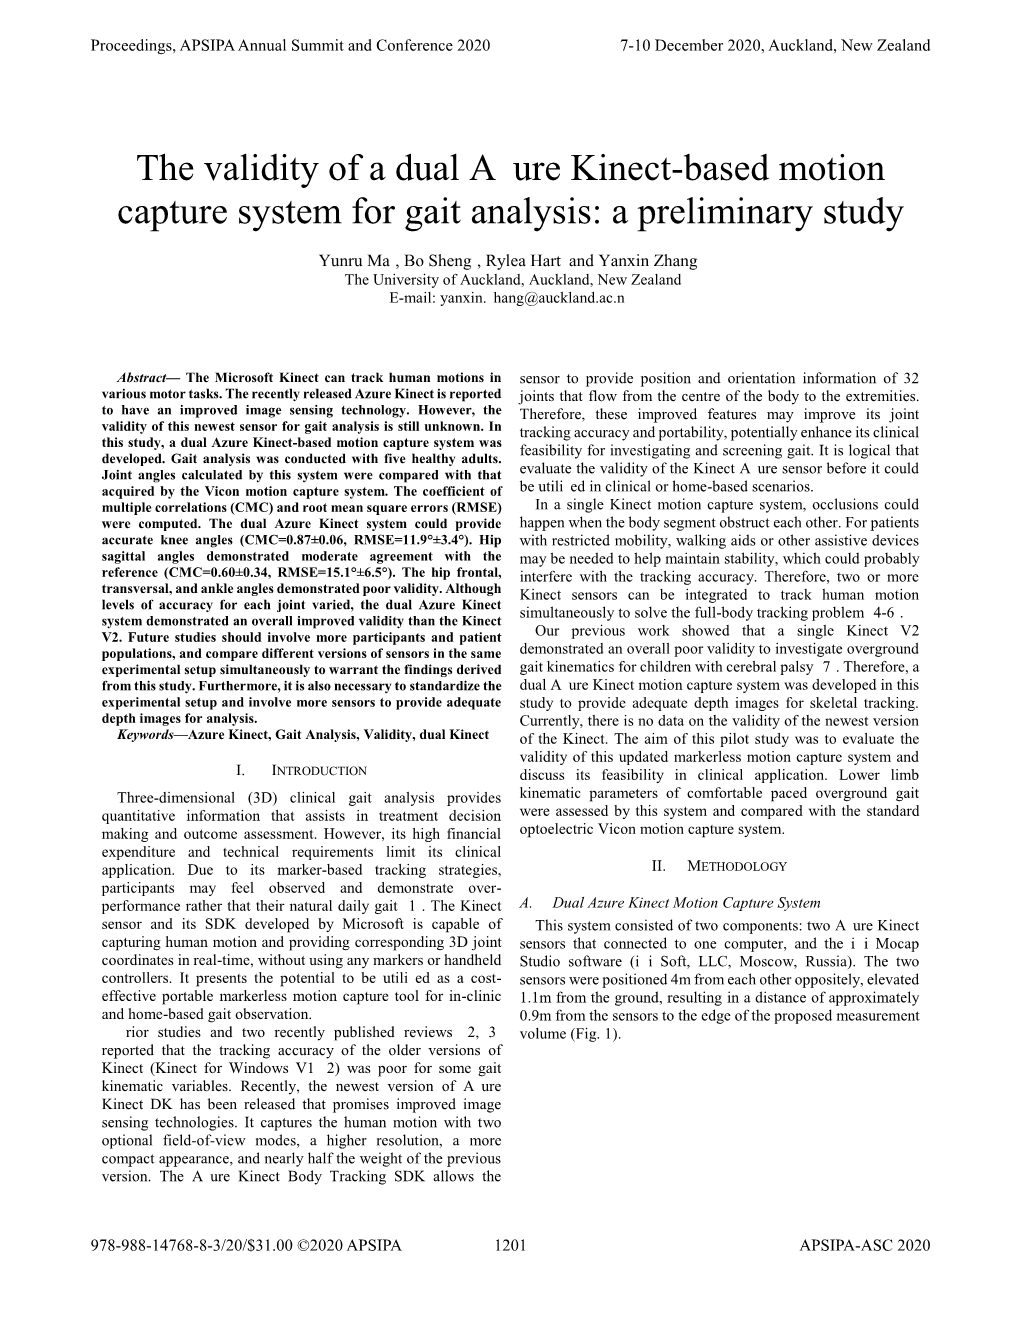 The Validity of a Dual Azure Kinect-Based Motion Capture System for Gait Analysis: a Preliminary Study